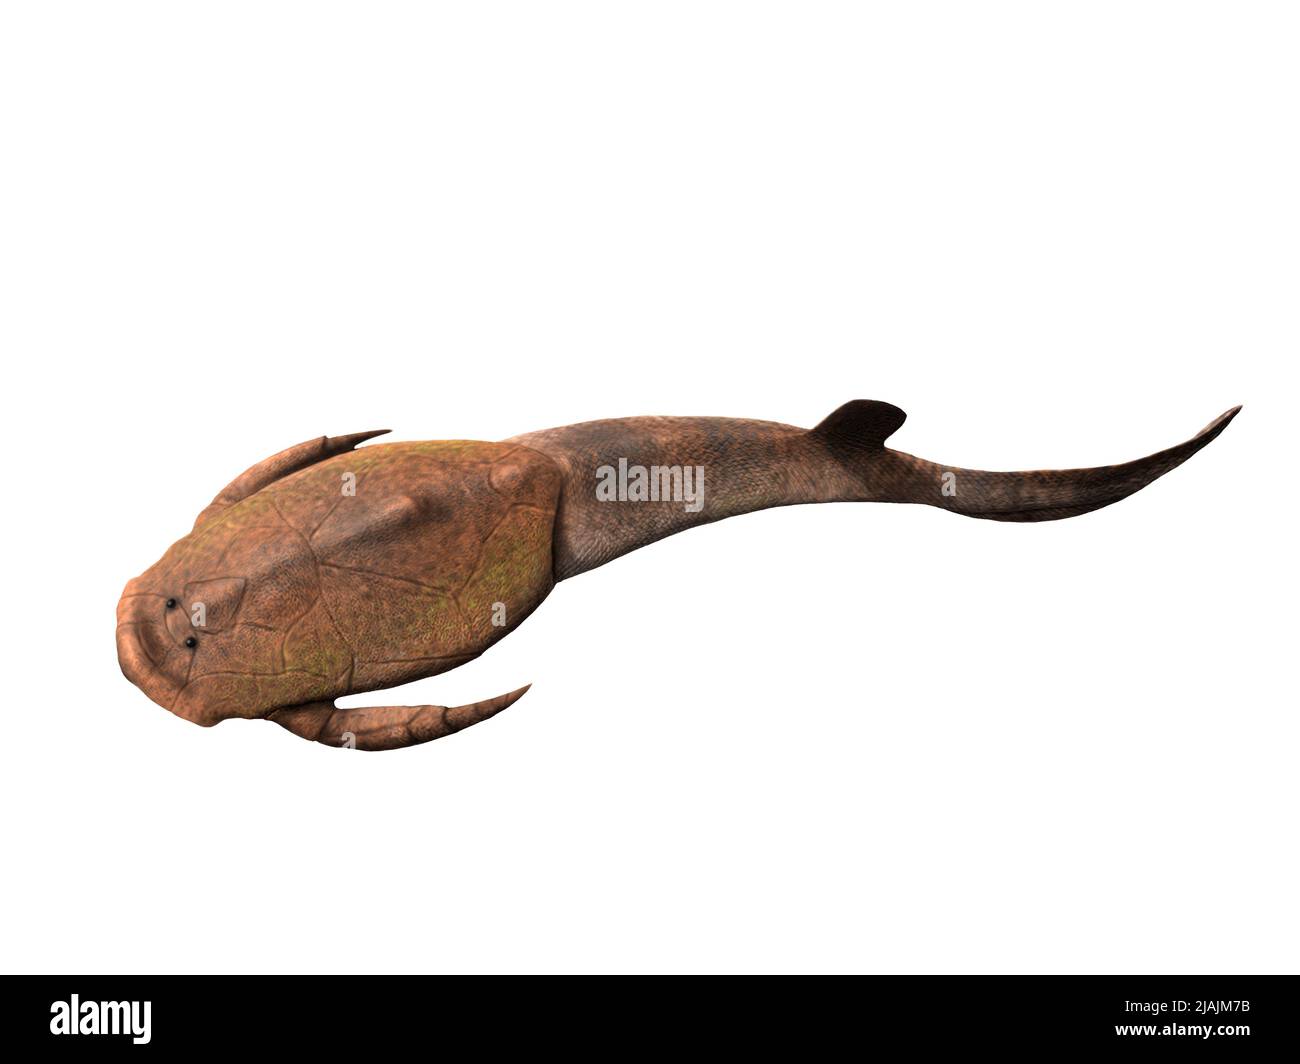 Yunnanolepis chii, a placoderm fish from the Devonian period of China. Stock Photo